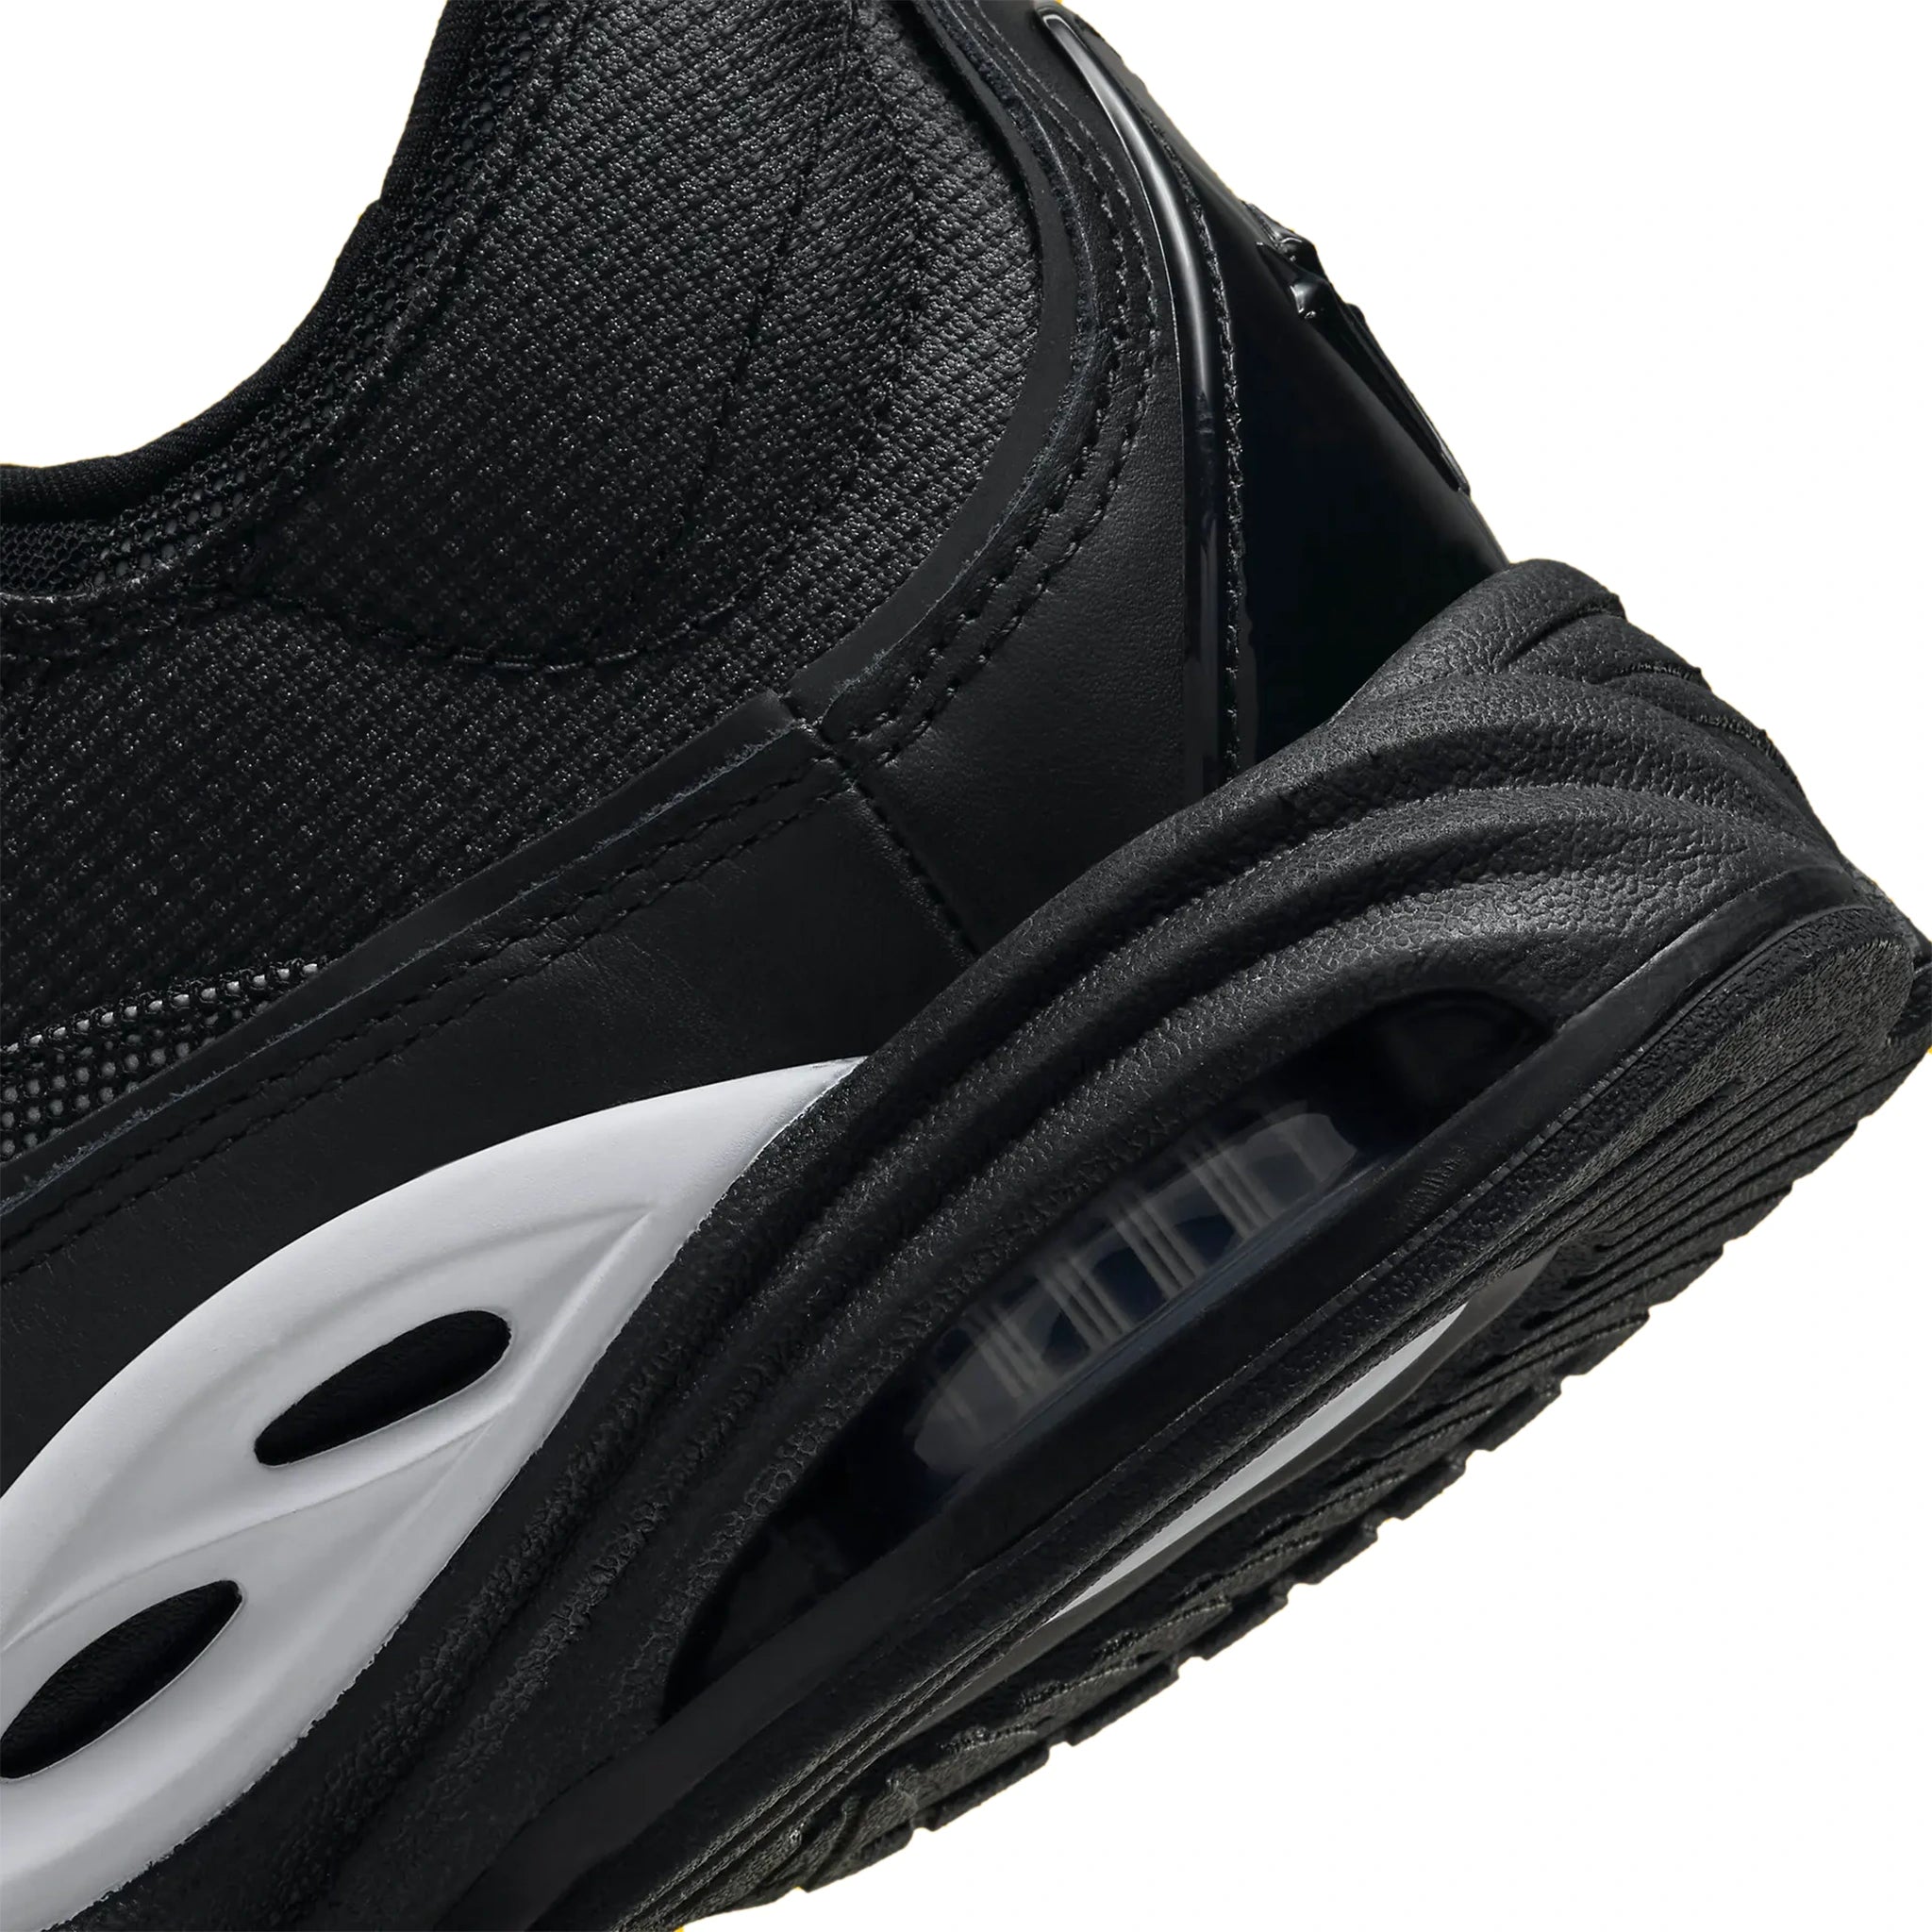 Heel details view of Nike x NOCTA Air Zoom Drive Black White